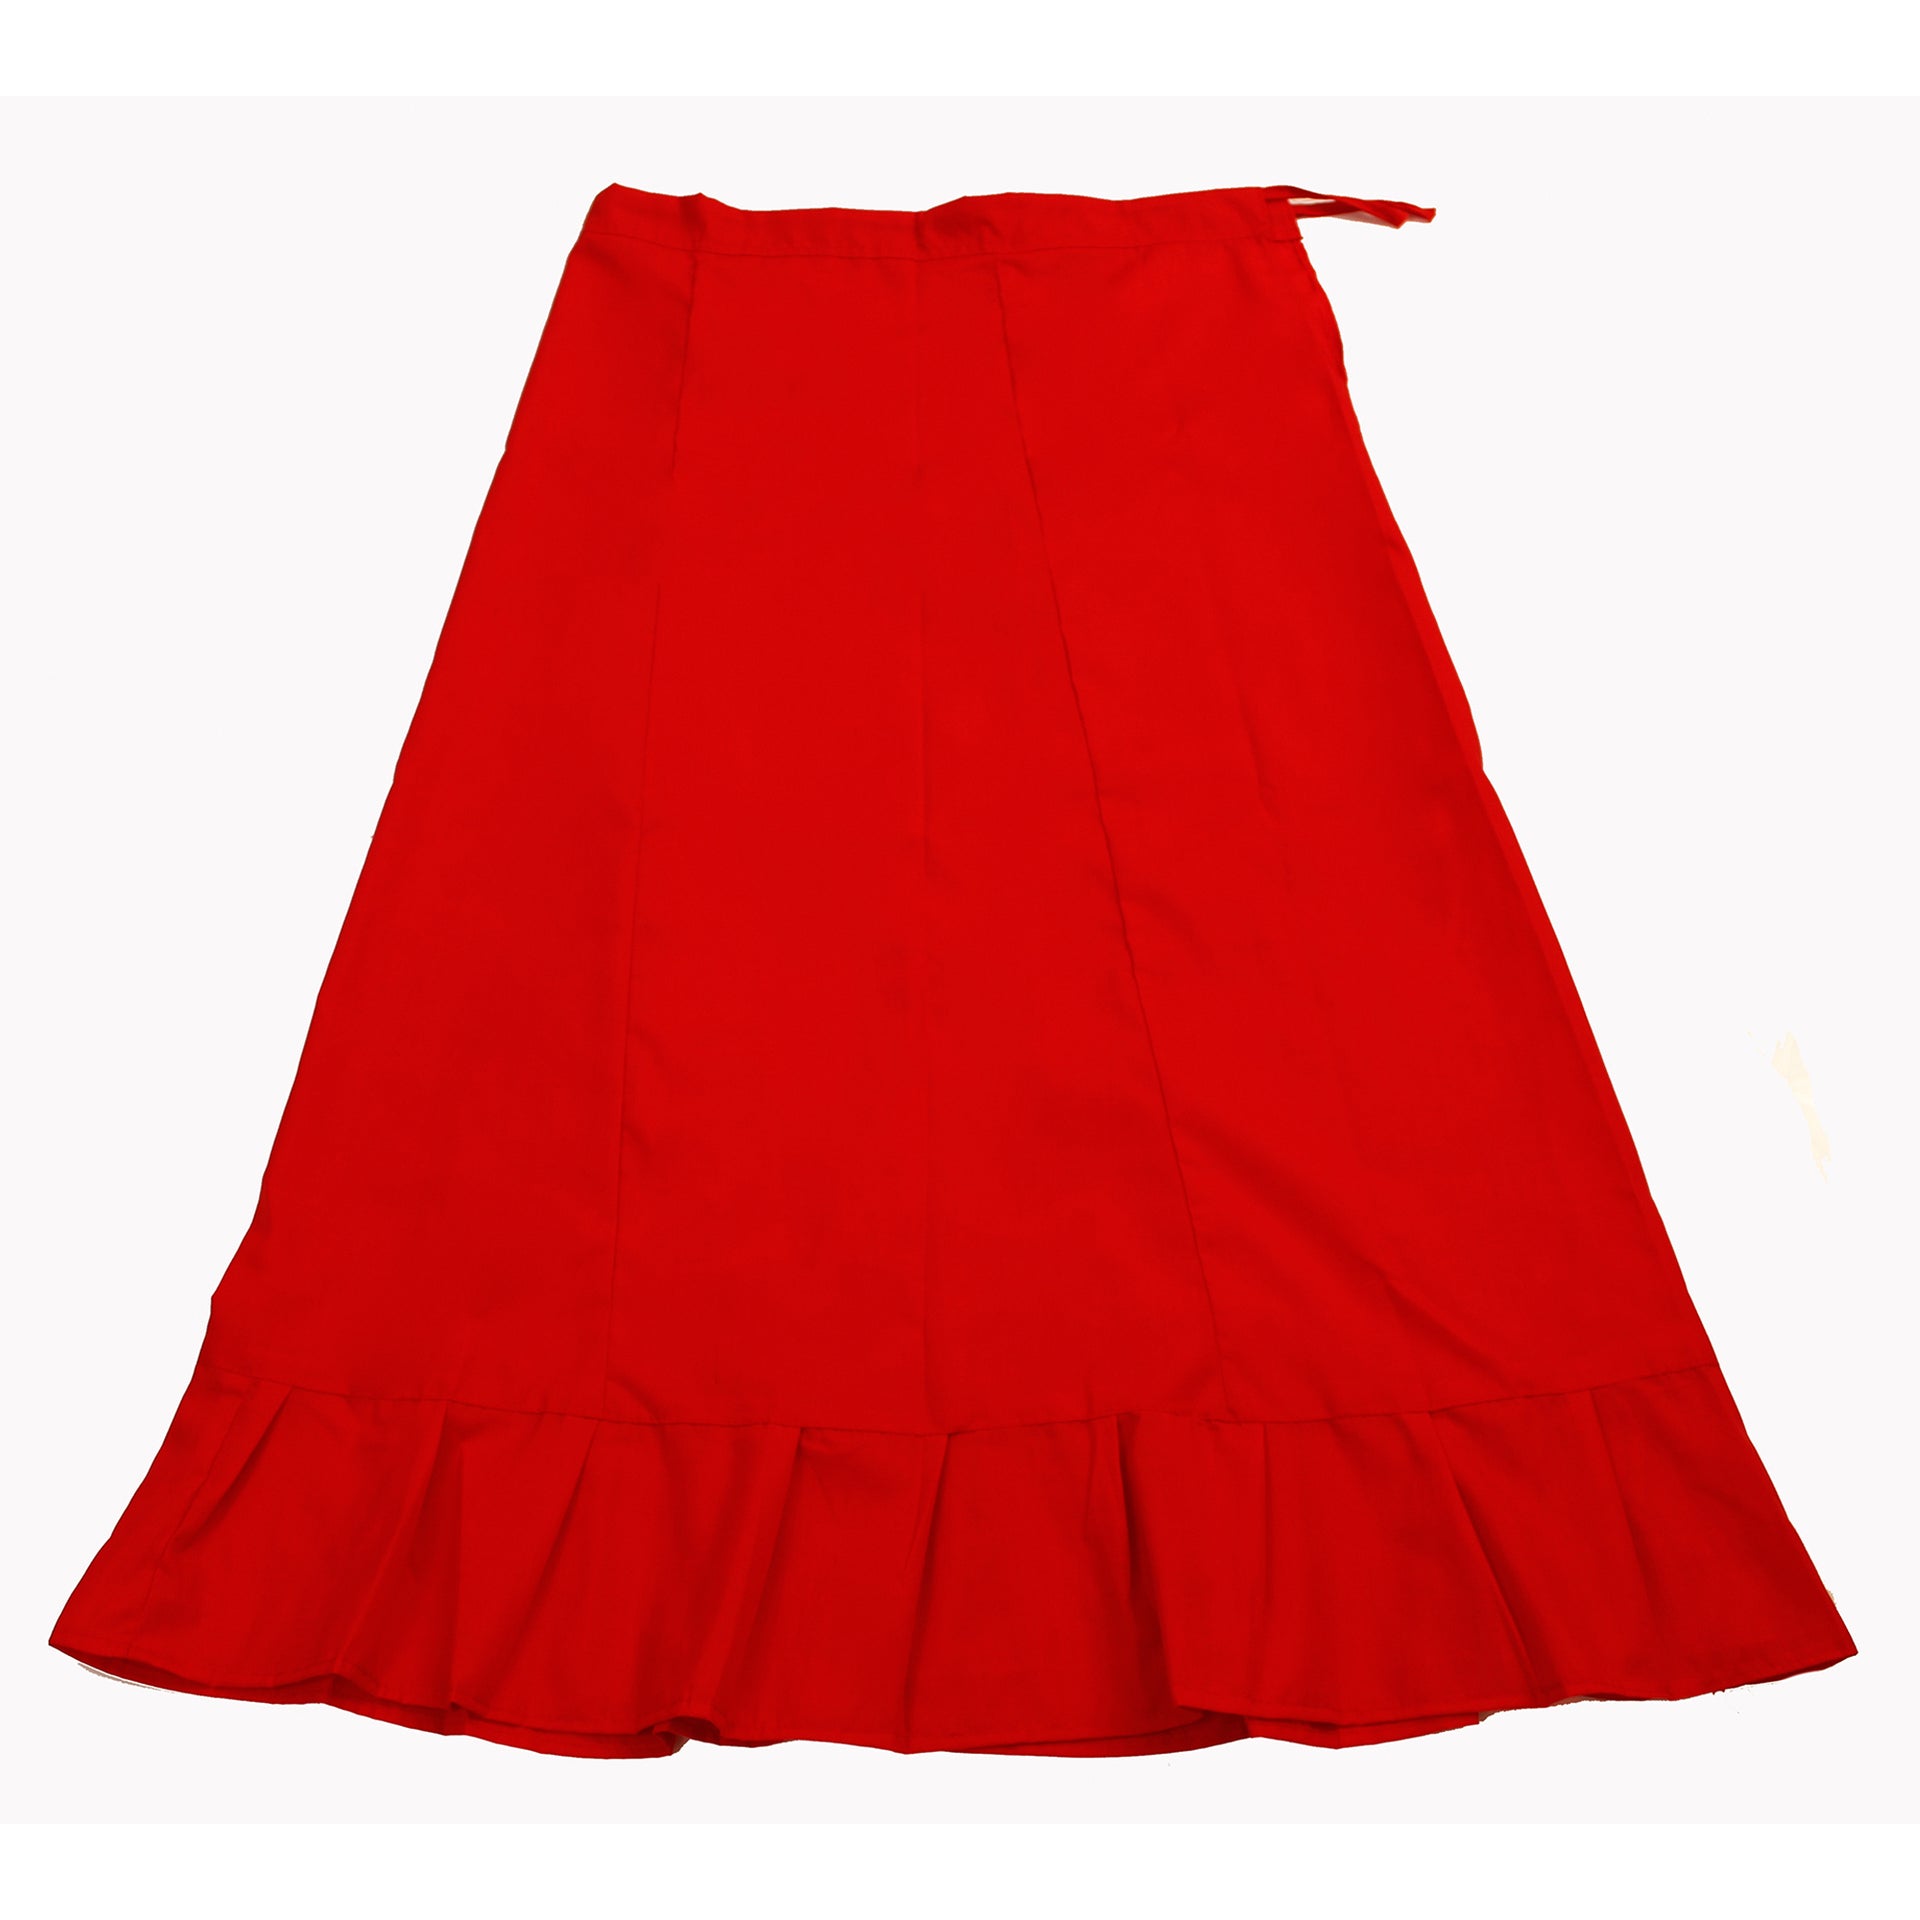 Petticoat Price Starting From Rs 89/Unit. Find Verified Sellers in